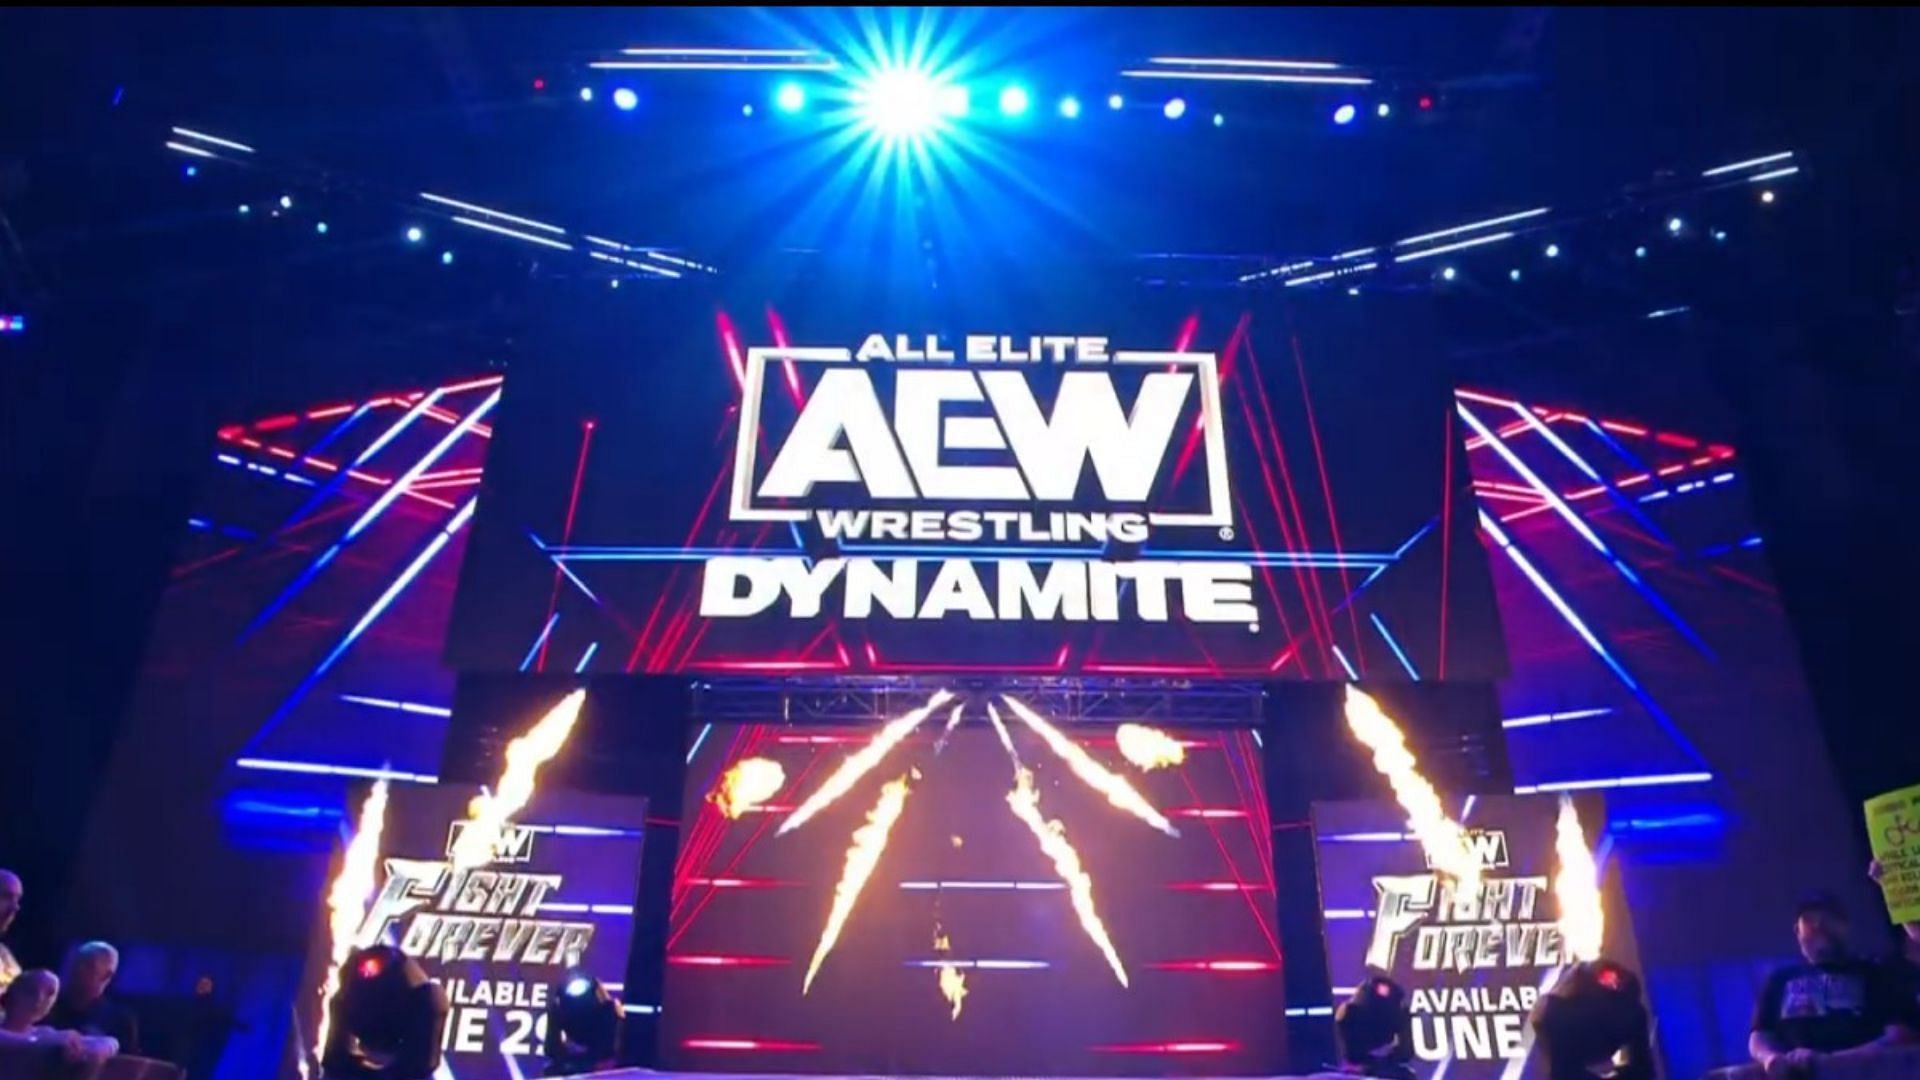 AEW Dynamite is the weekly Wednesday show of the brand